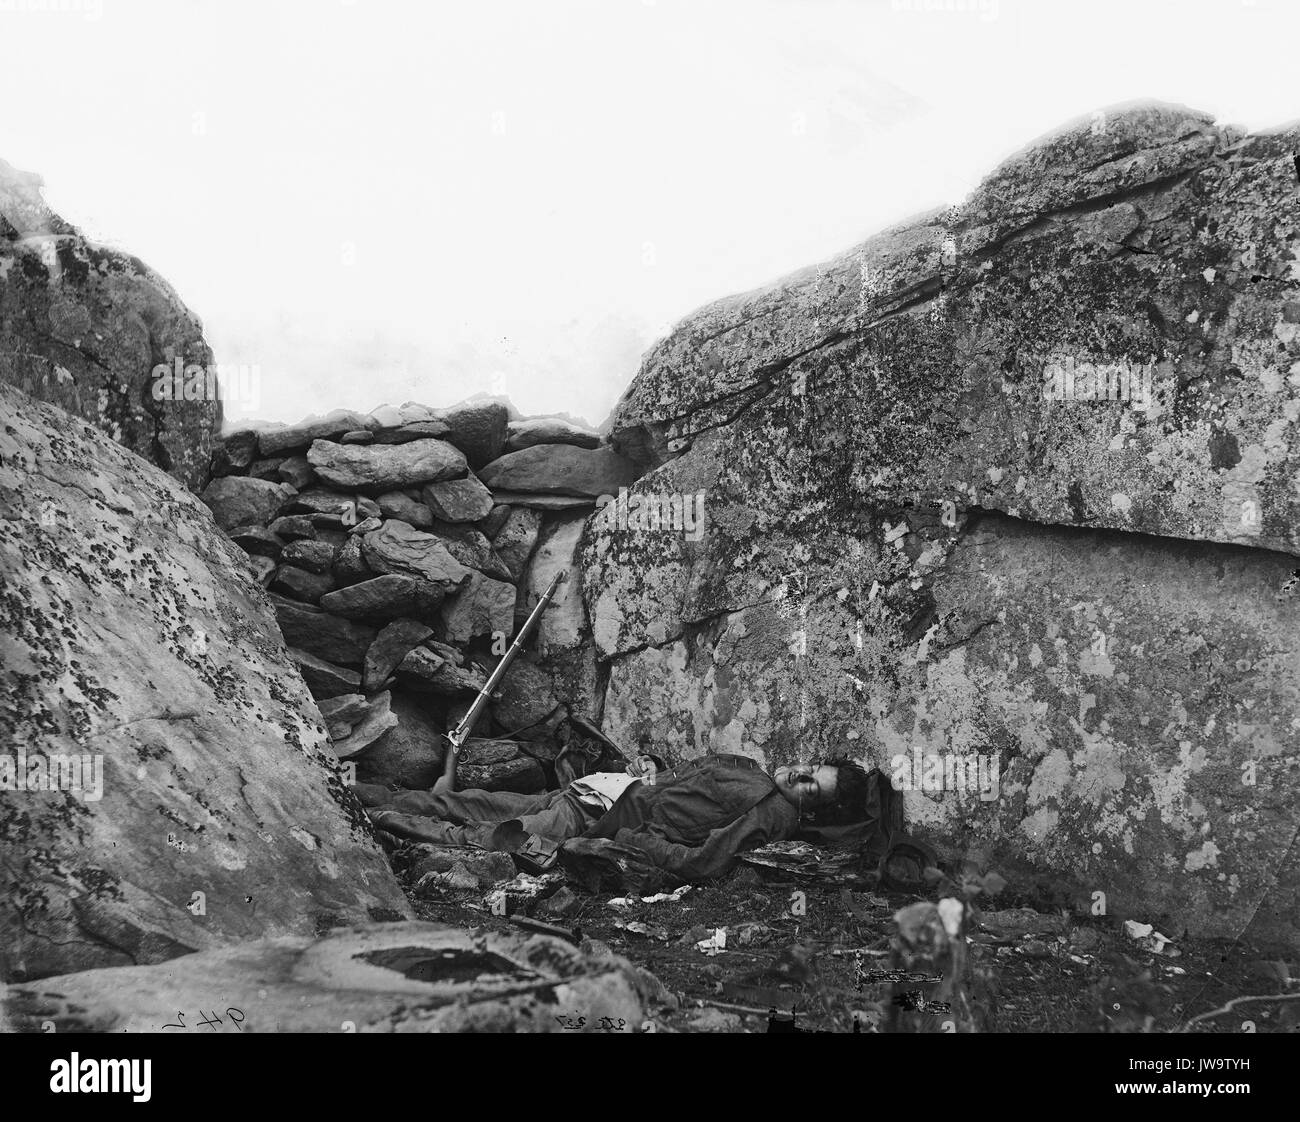 TIMOTHY H. O'SULLIVAN (c 1840-1882)  American photographer.  Photo entitled 'The home of a Rebel Sharpshooter, Gettysburg (1863)'  Confederate dead at Devil's Den, Gettysburg in July 1863 Stock Photo